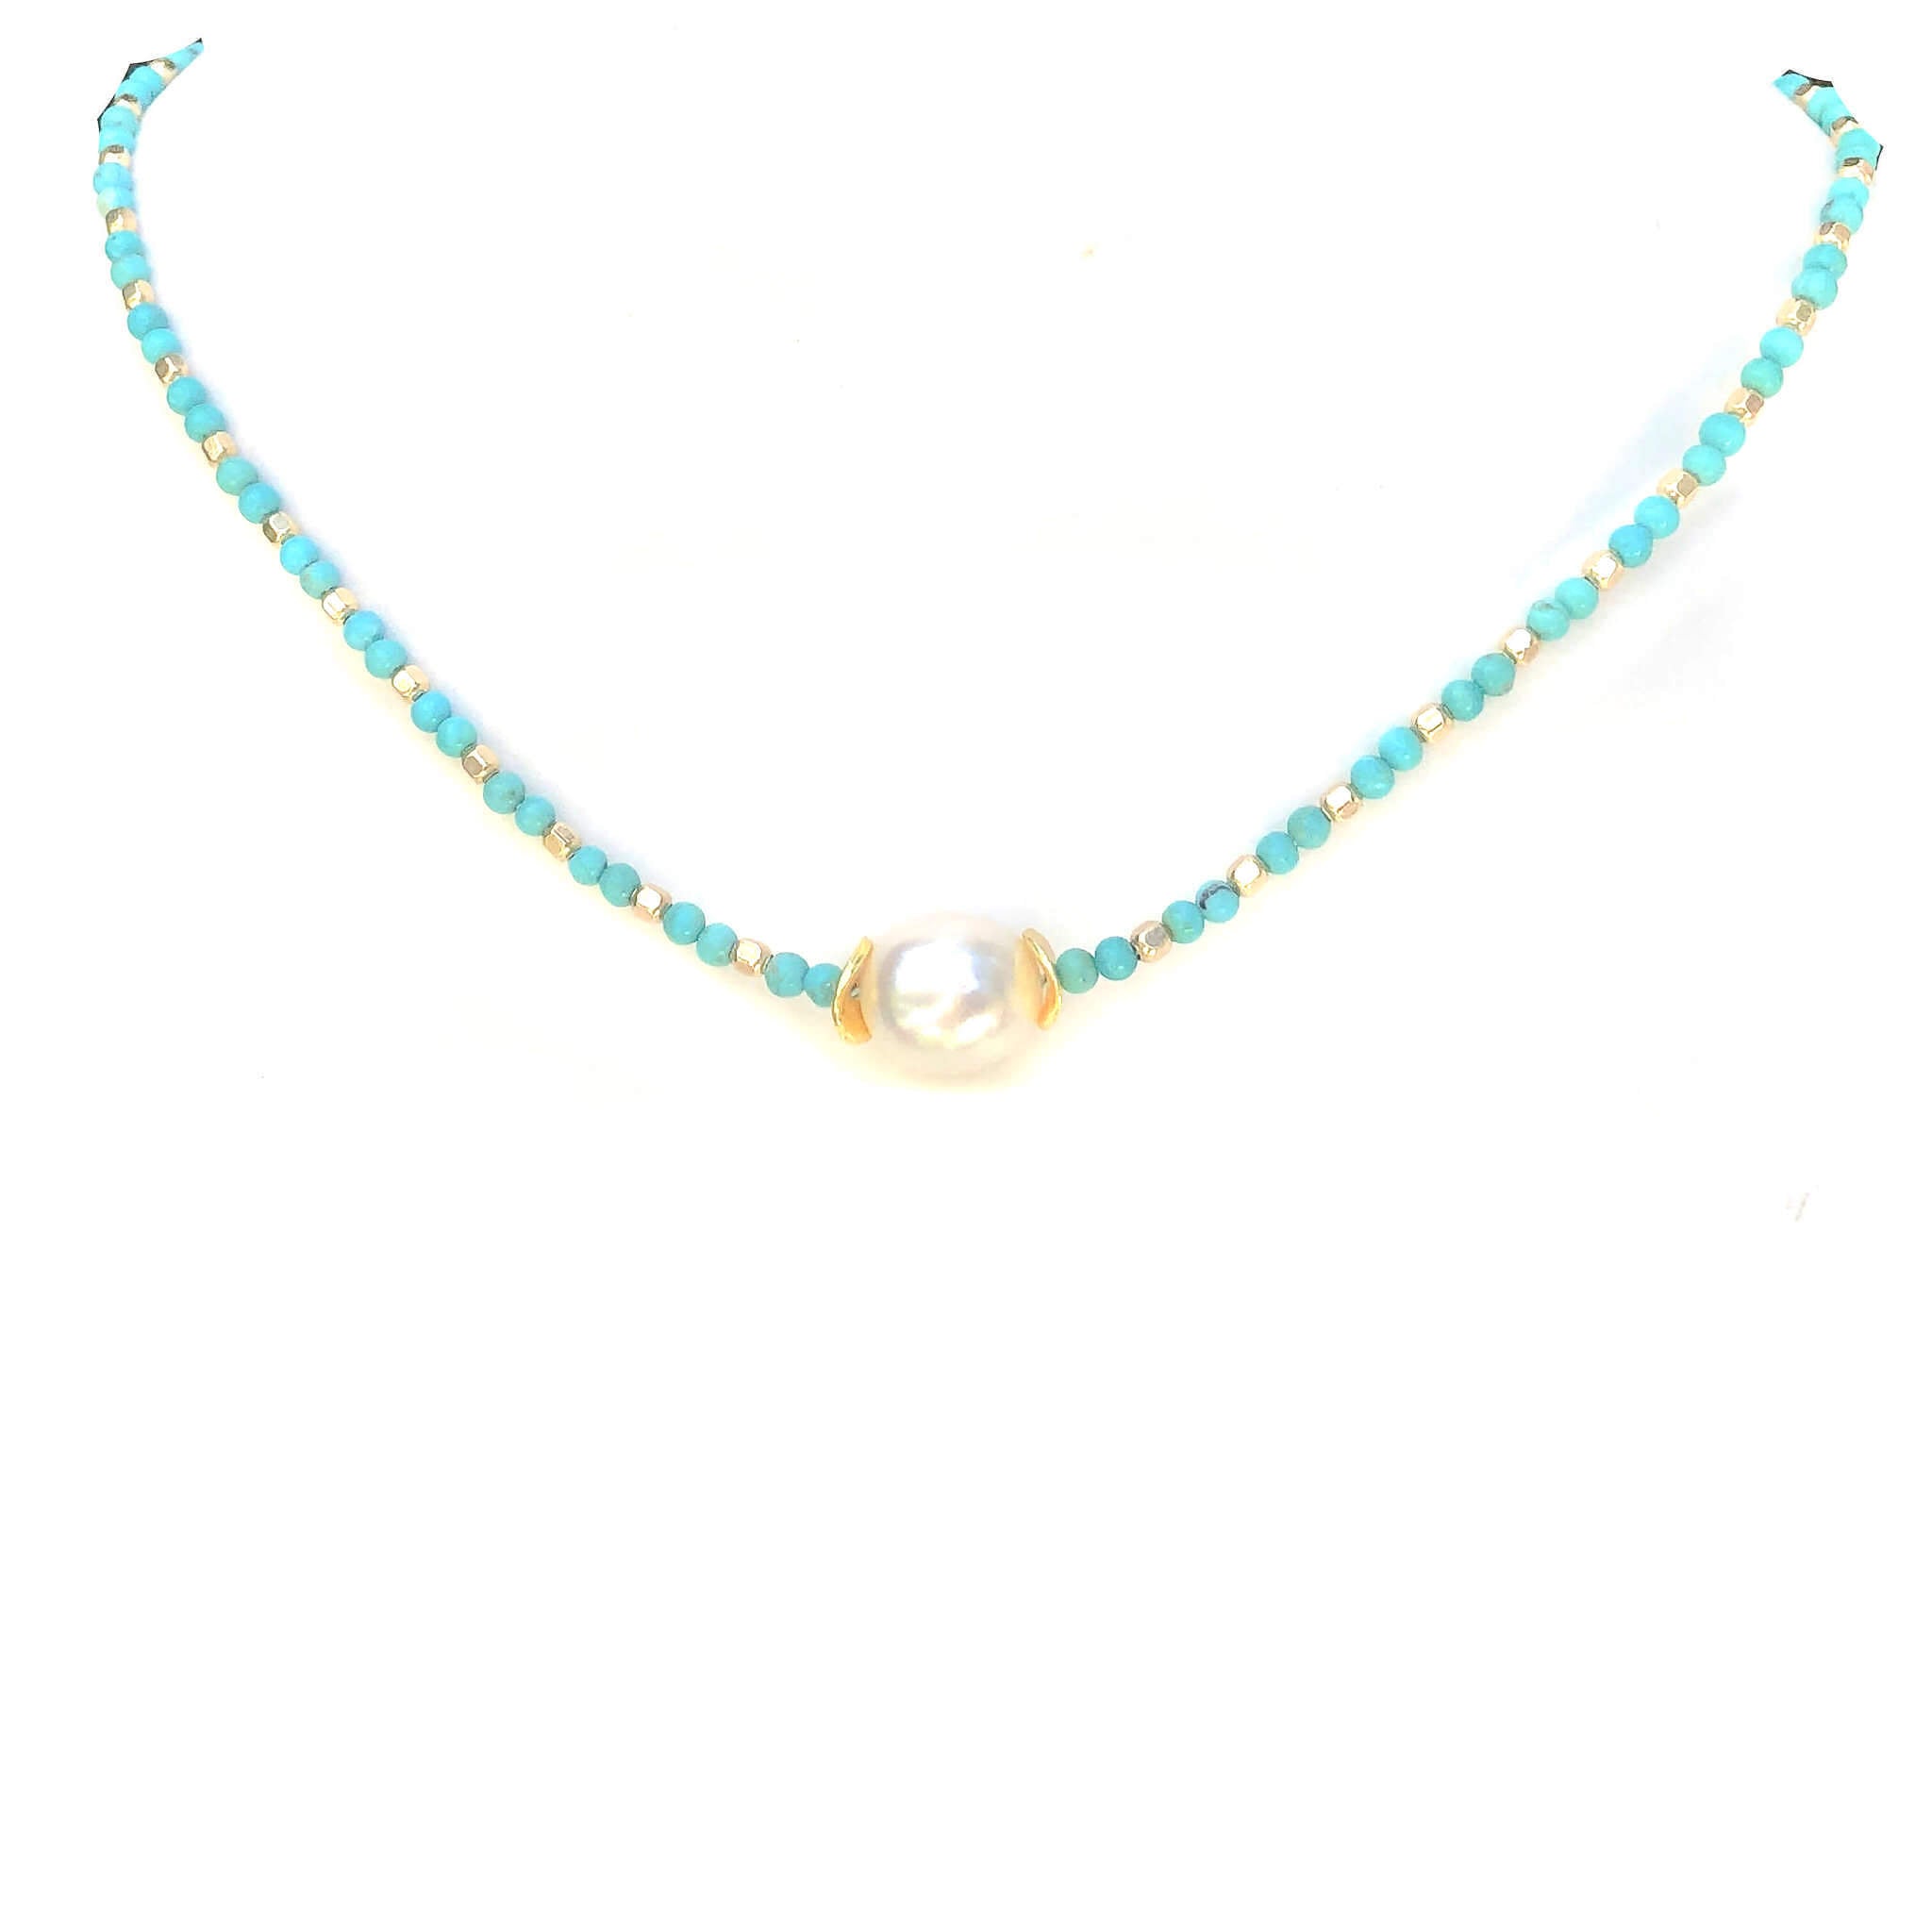 Turquoise Blue Beaded Necklace With White South Sea Cultured Pearl